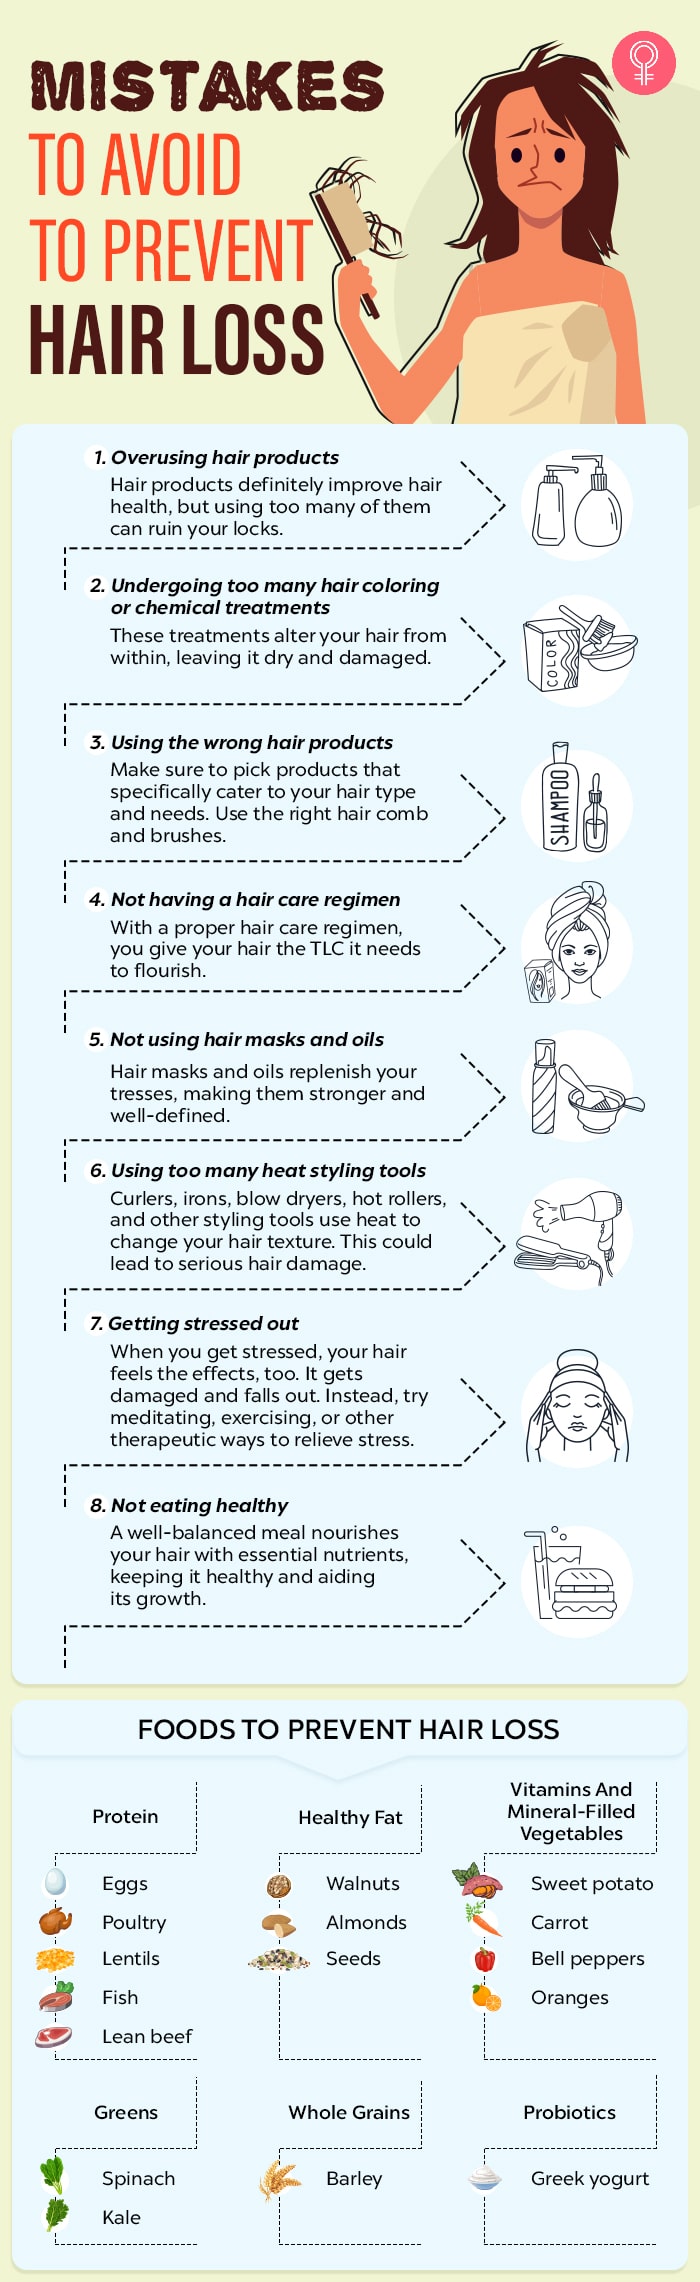 8 mistakes to avoid to prevent hair loss (infographic)